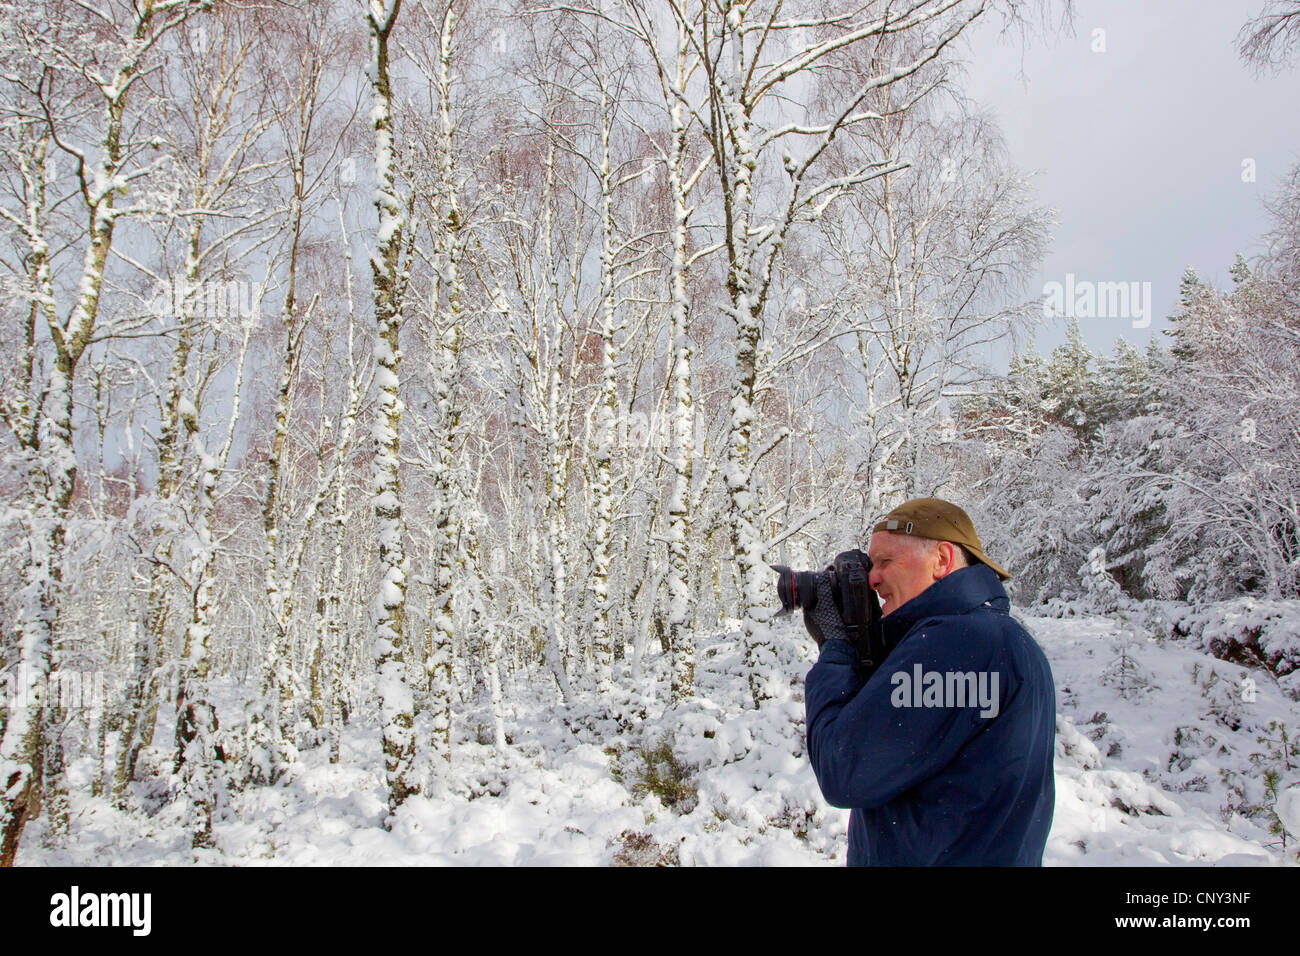 Photographer in winter birch forest, United Kingdom, Scotland, Cairngorms National Park Stock Photo